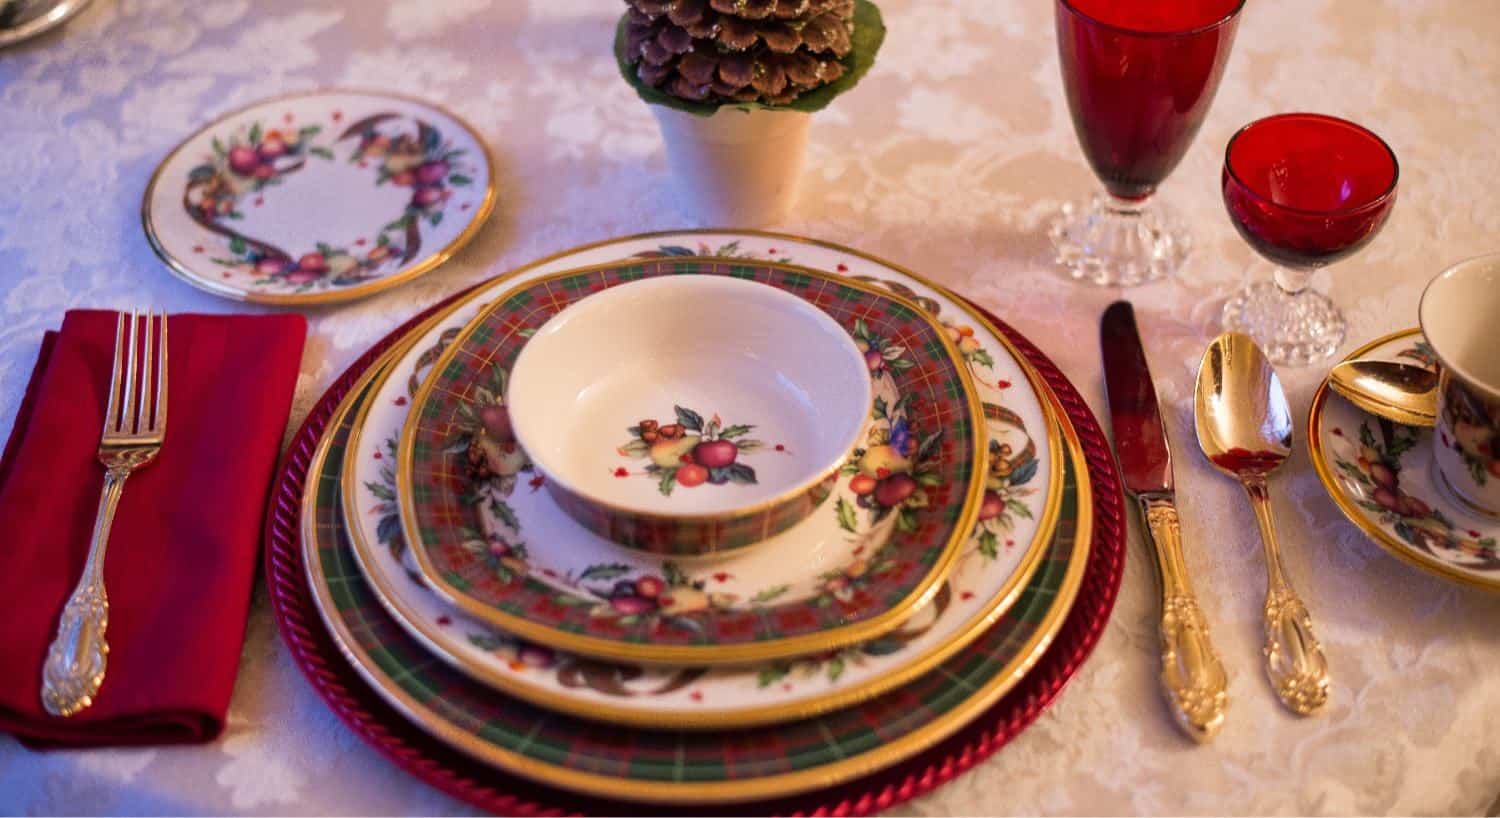 Plaid and fruit decorated fine china place setting with gold plated silverware, red napkin, and red glasses